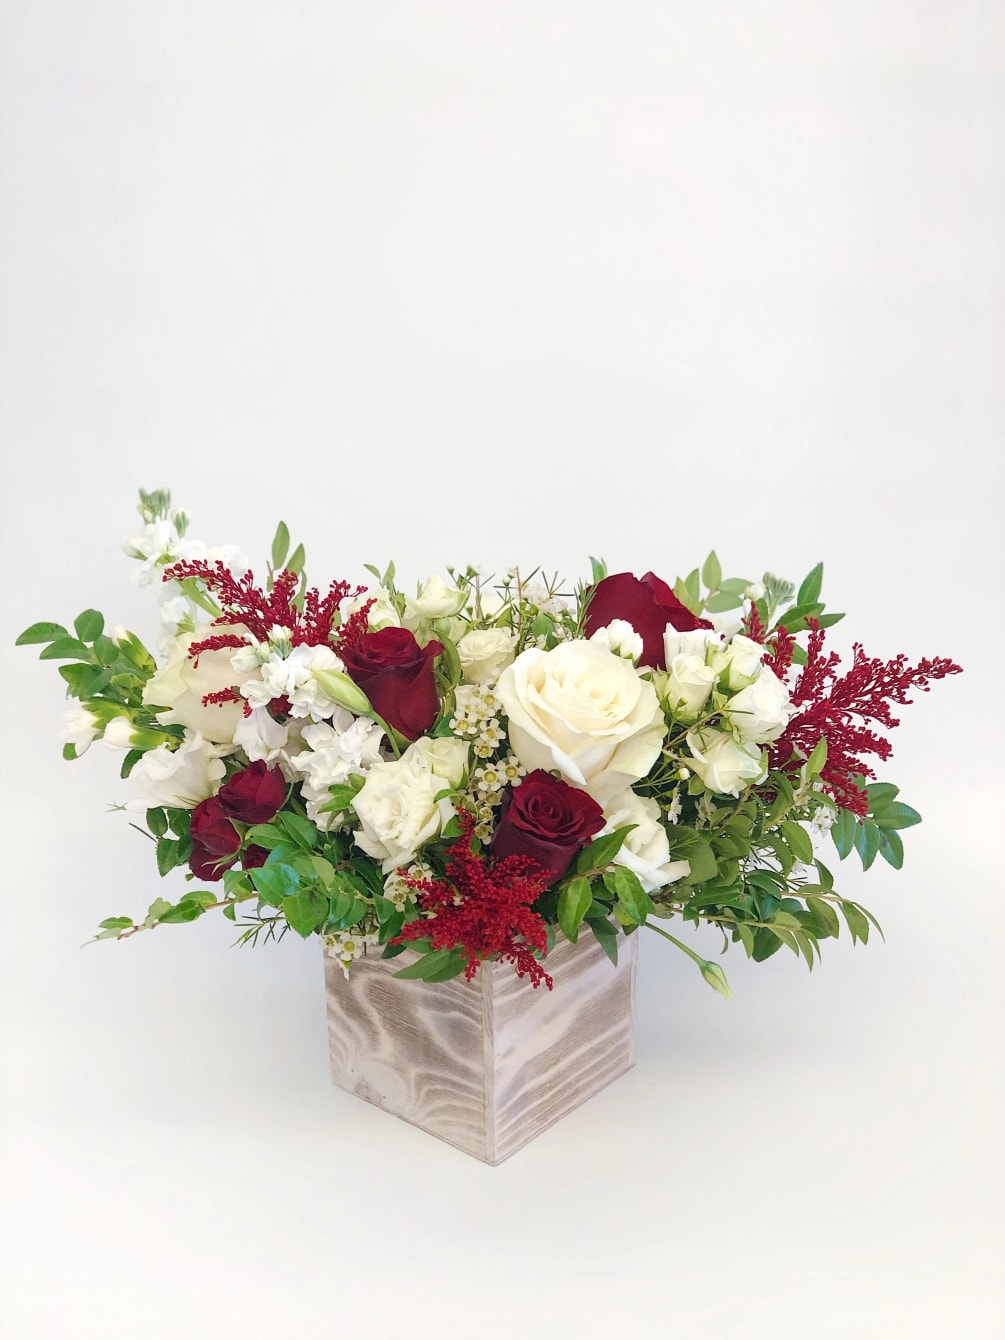 Mixed flower arrangement with red and white flowers in a box.